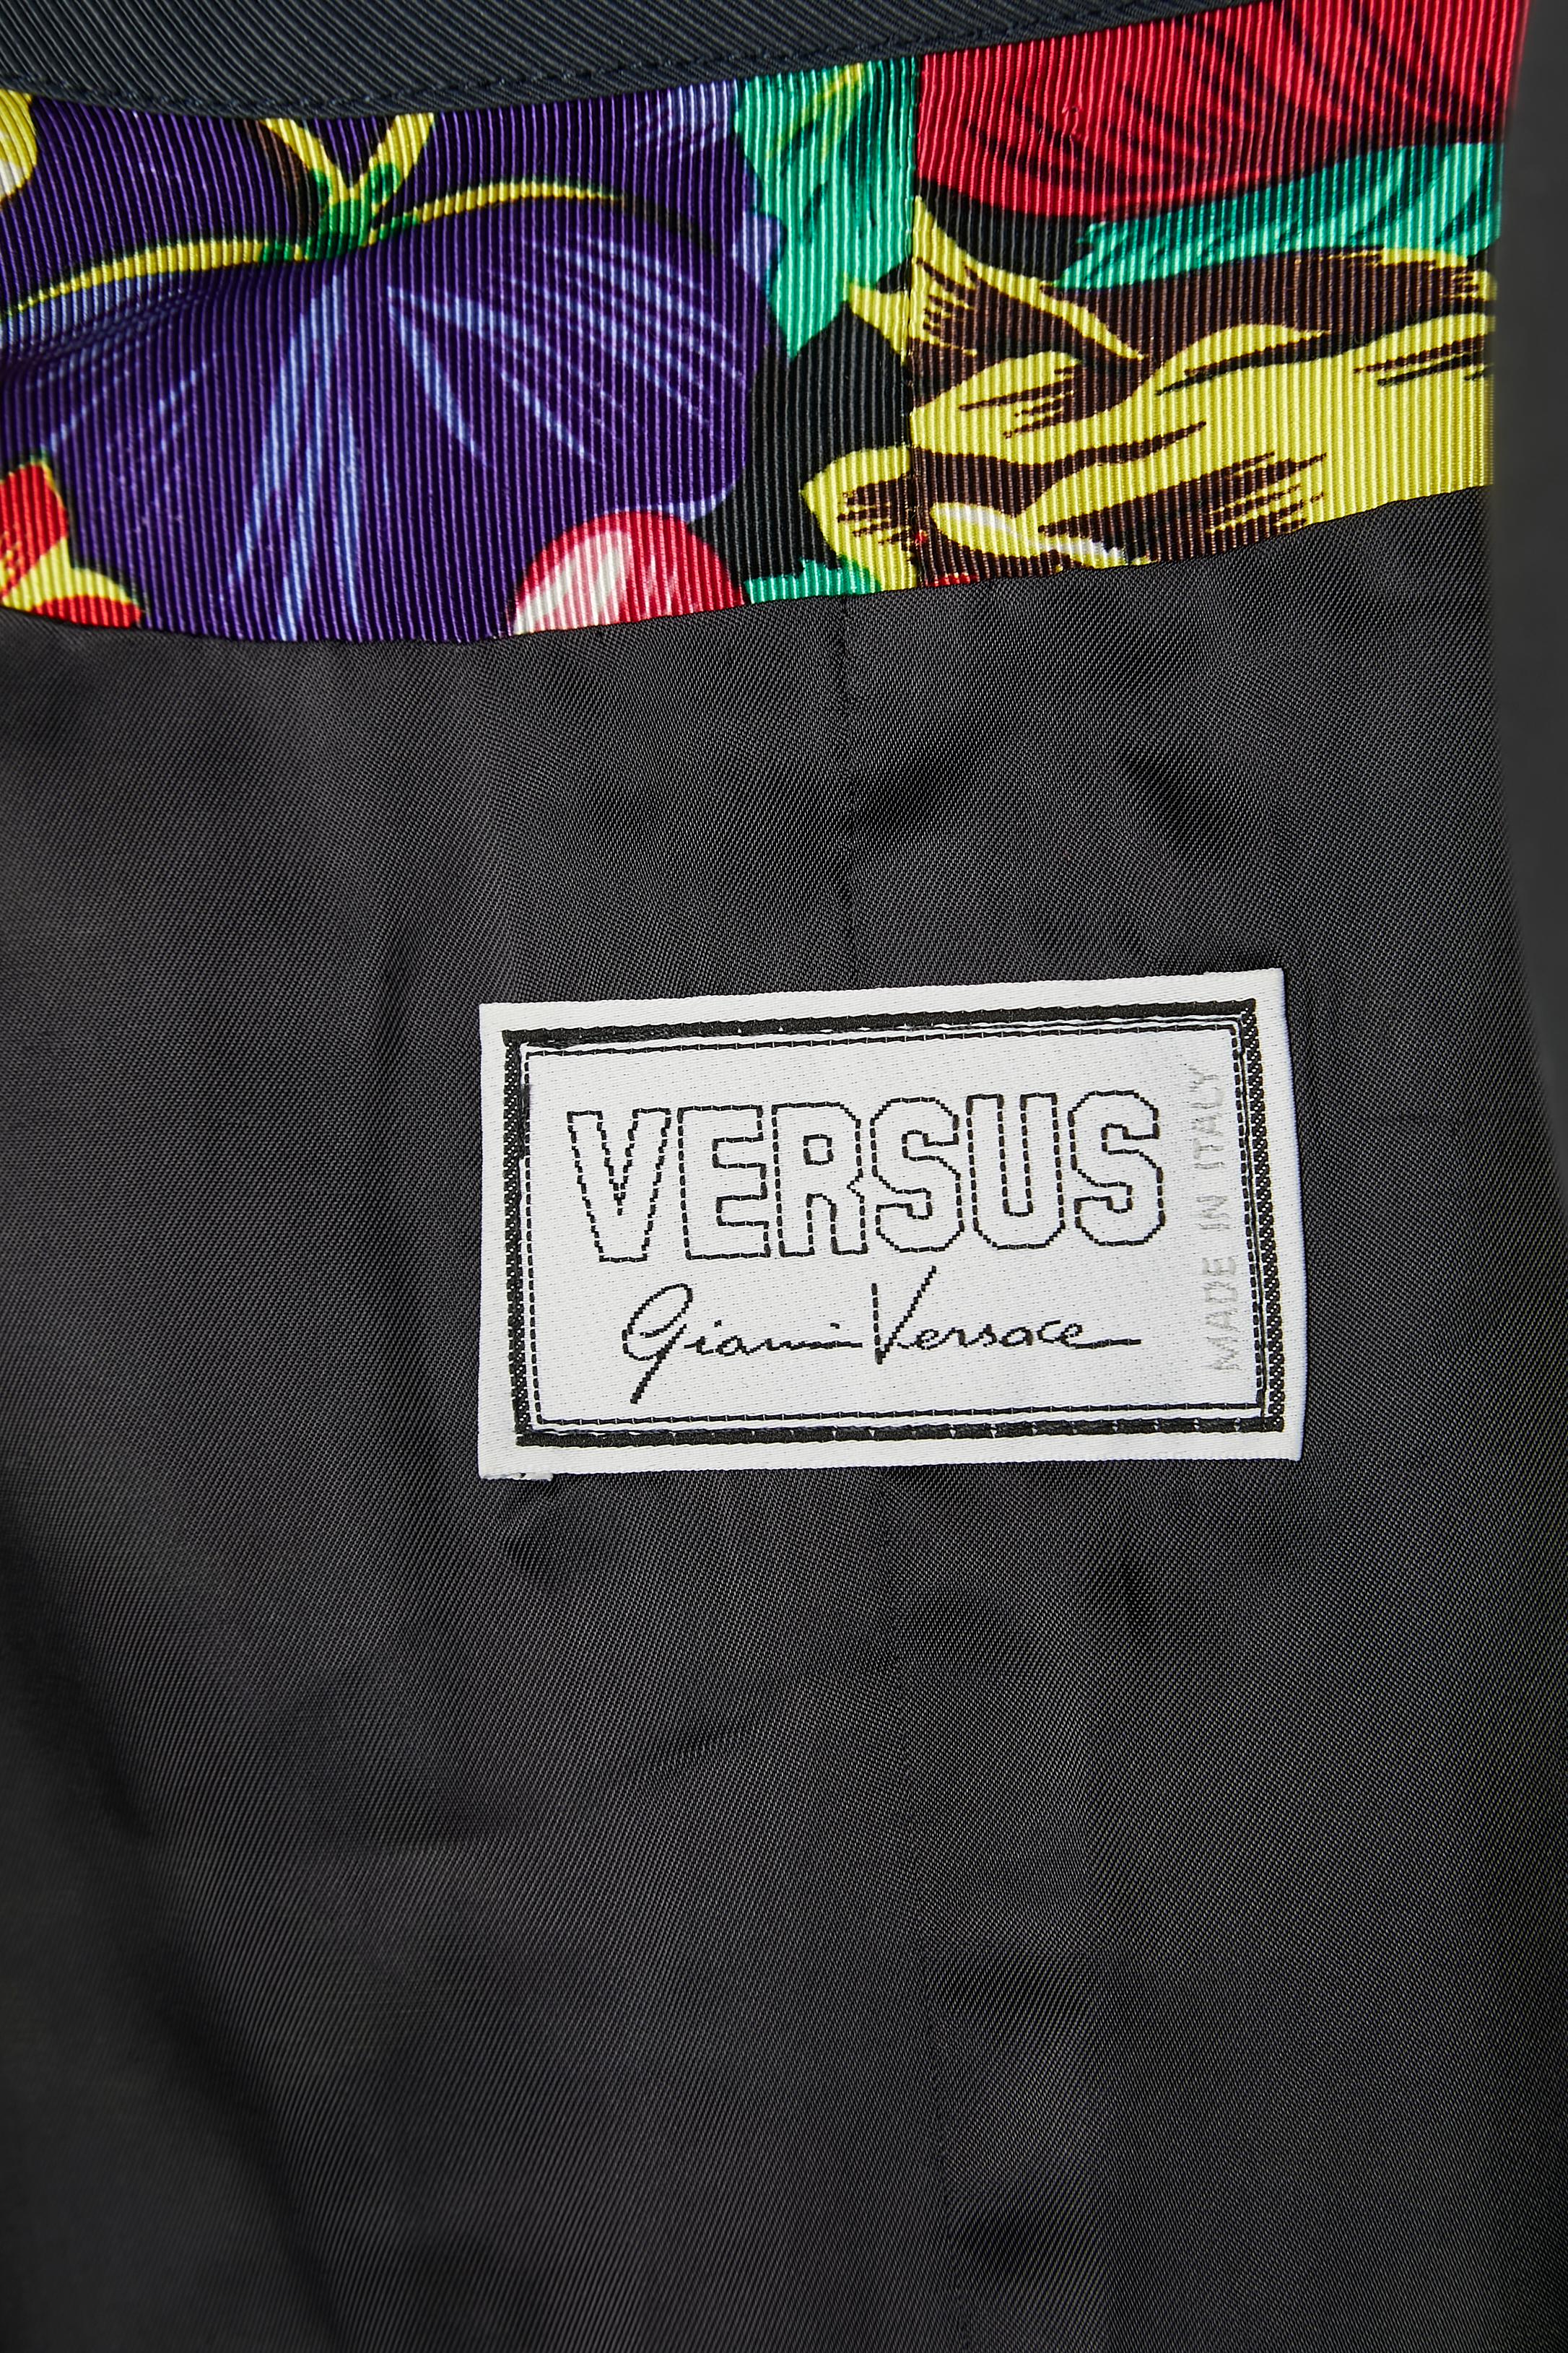 Single breasted flower printed jacket with jewlery buttons Versus Gianni Versace For Sale 1